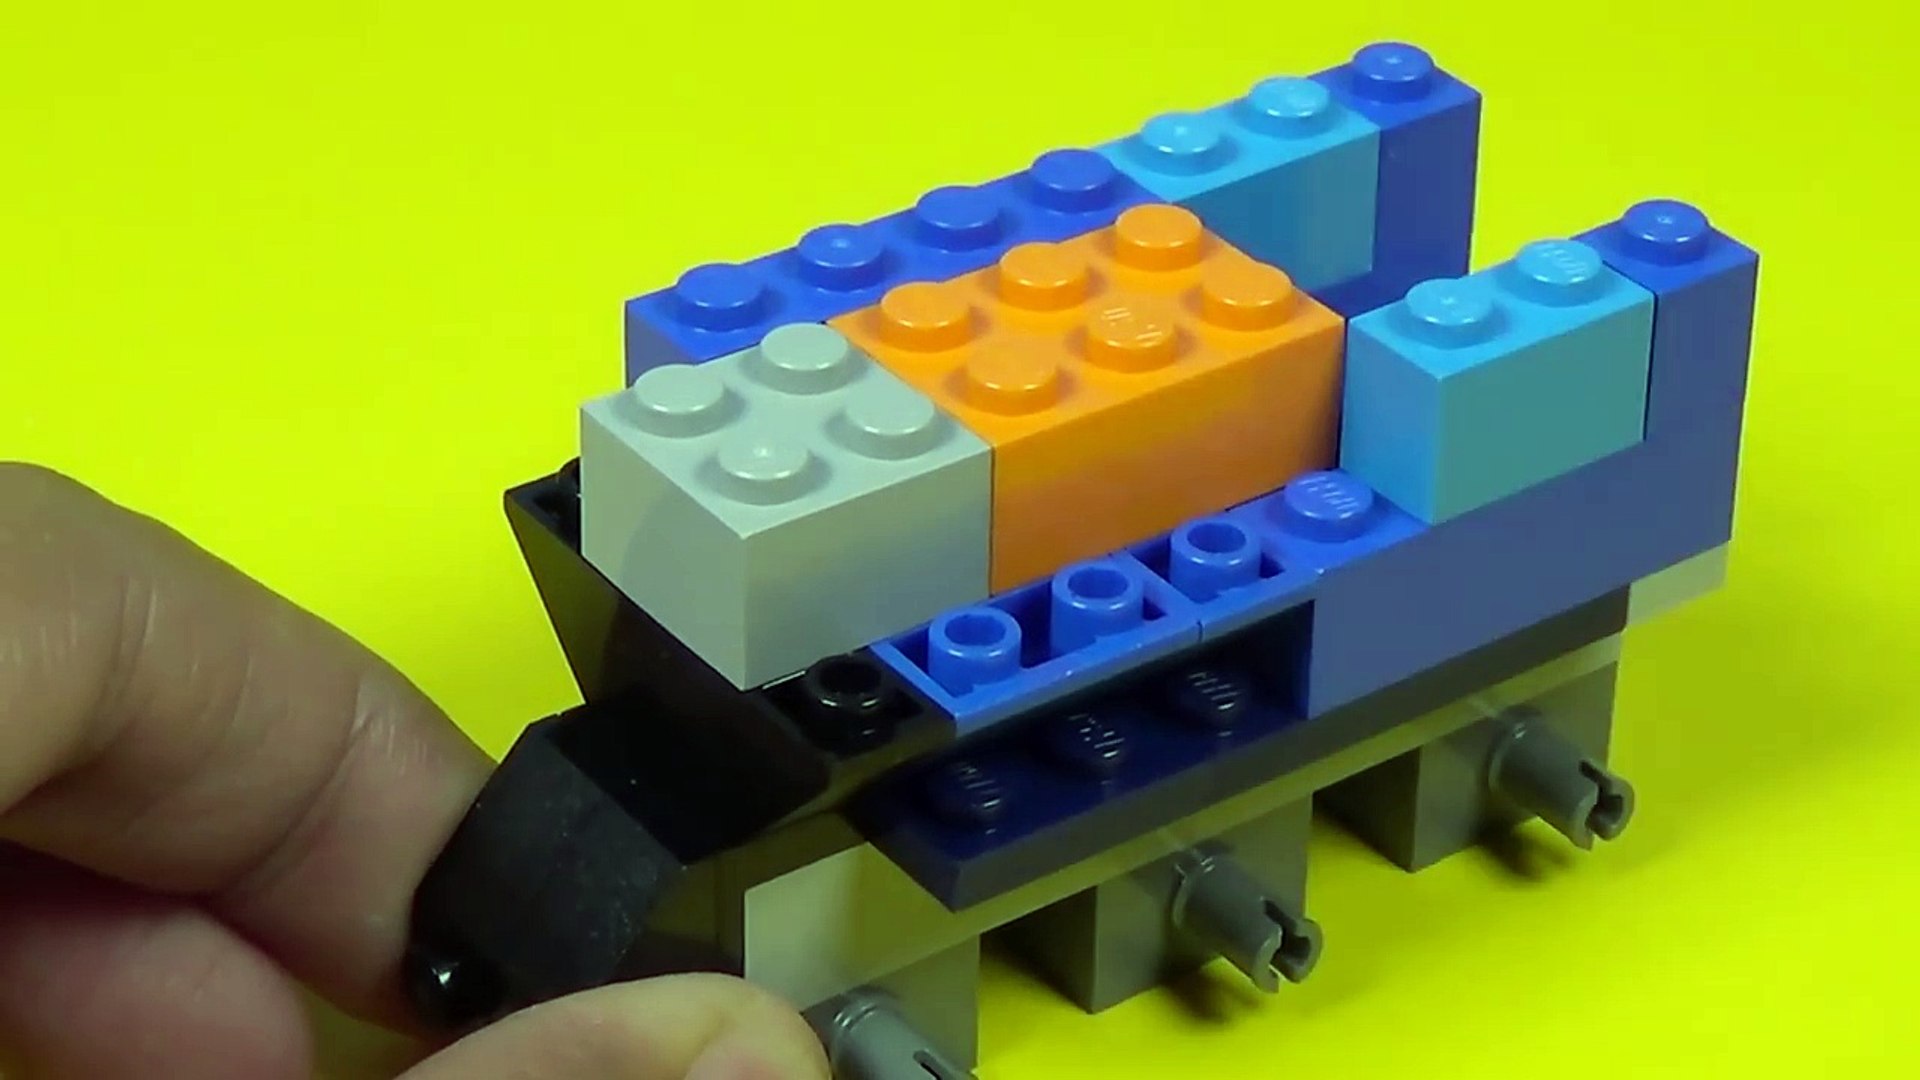 Lego Quad Bike Building Instructions - Lego Classic 10696 How To” -  Dailymotion Video